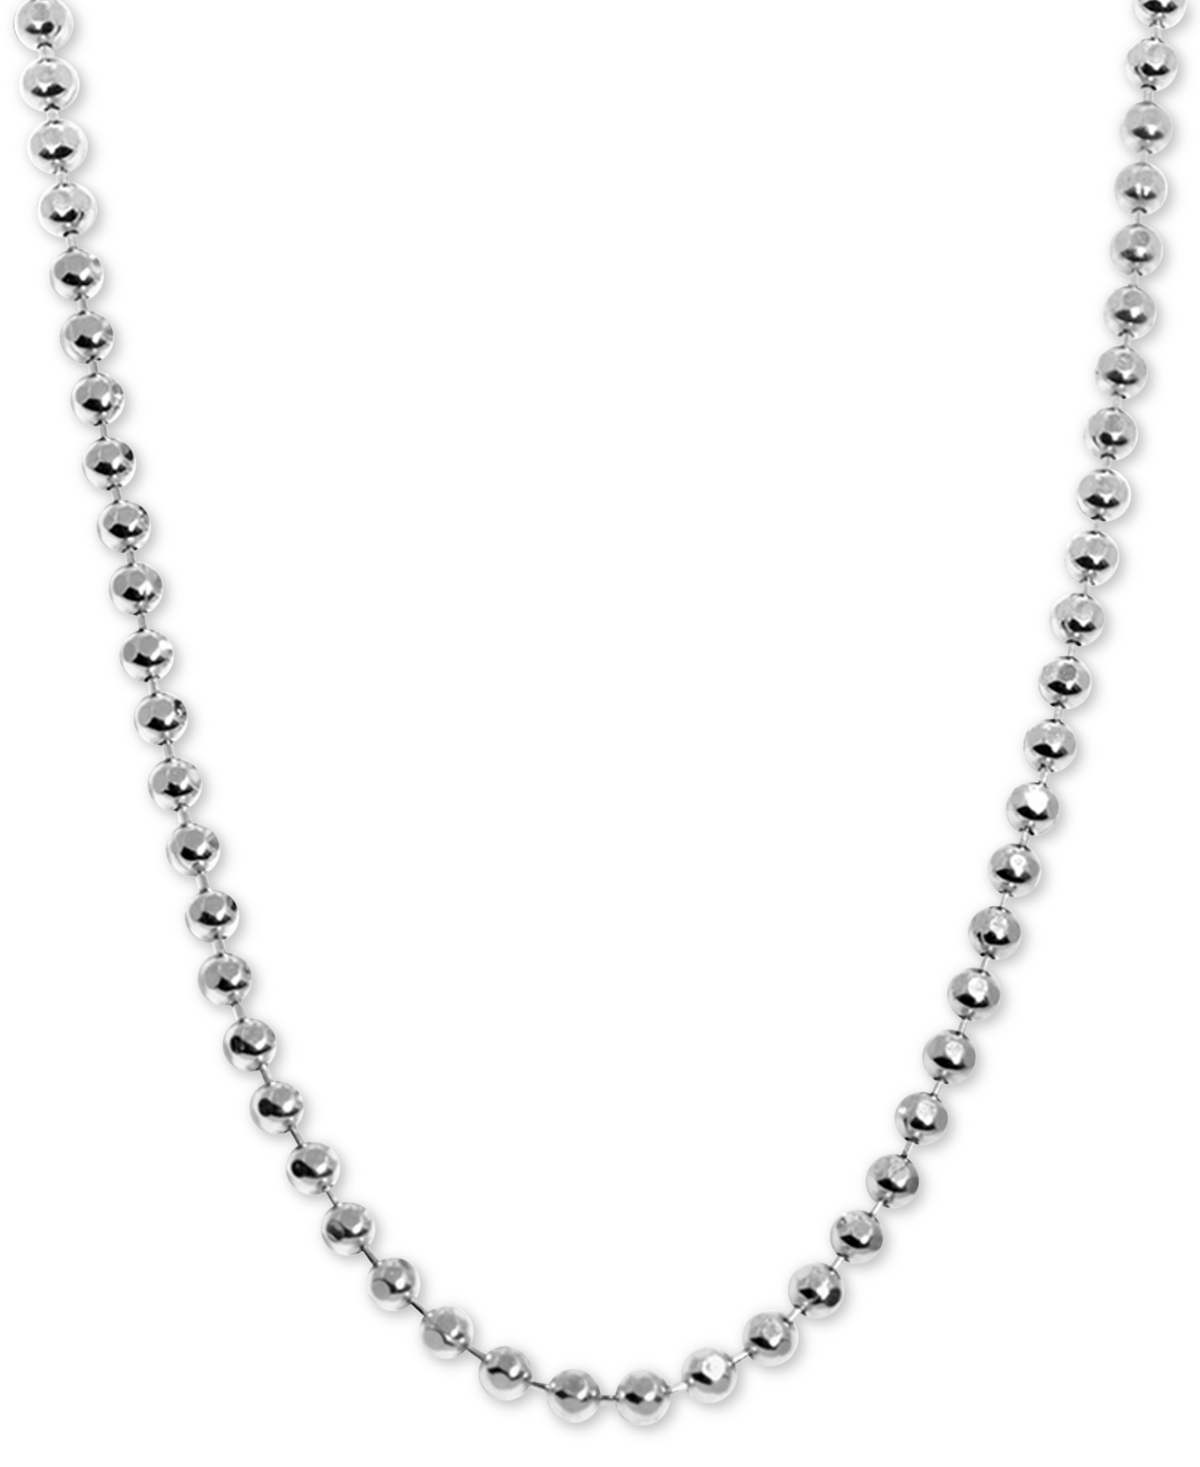 Beaded 18" Chain Necklace in Sterling Silver - Sterling Silver